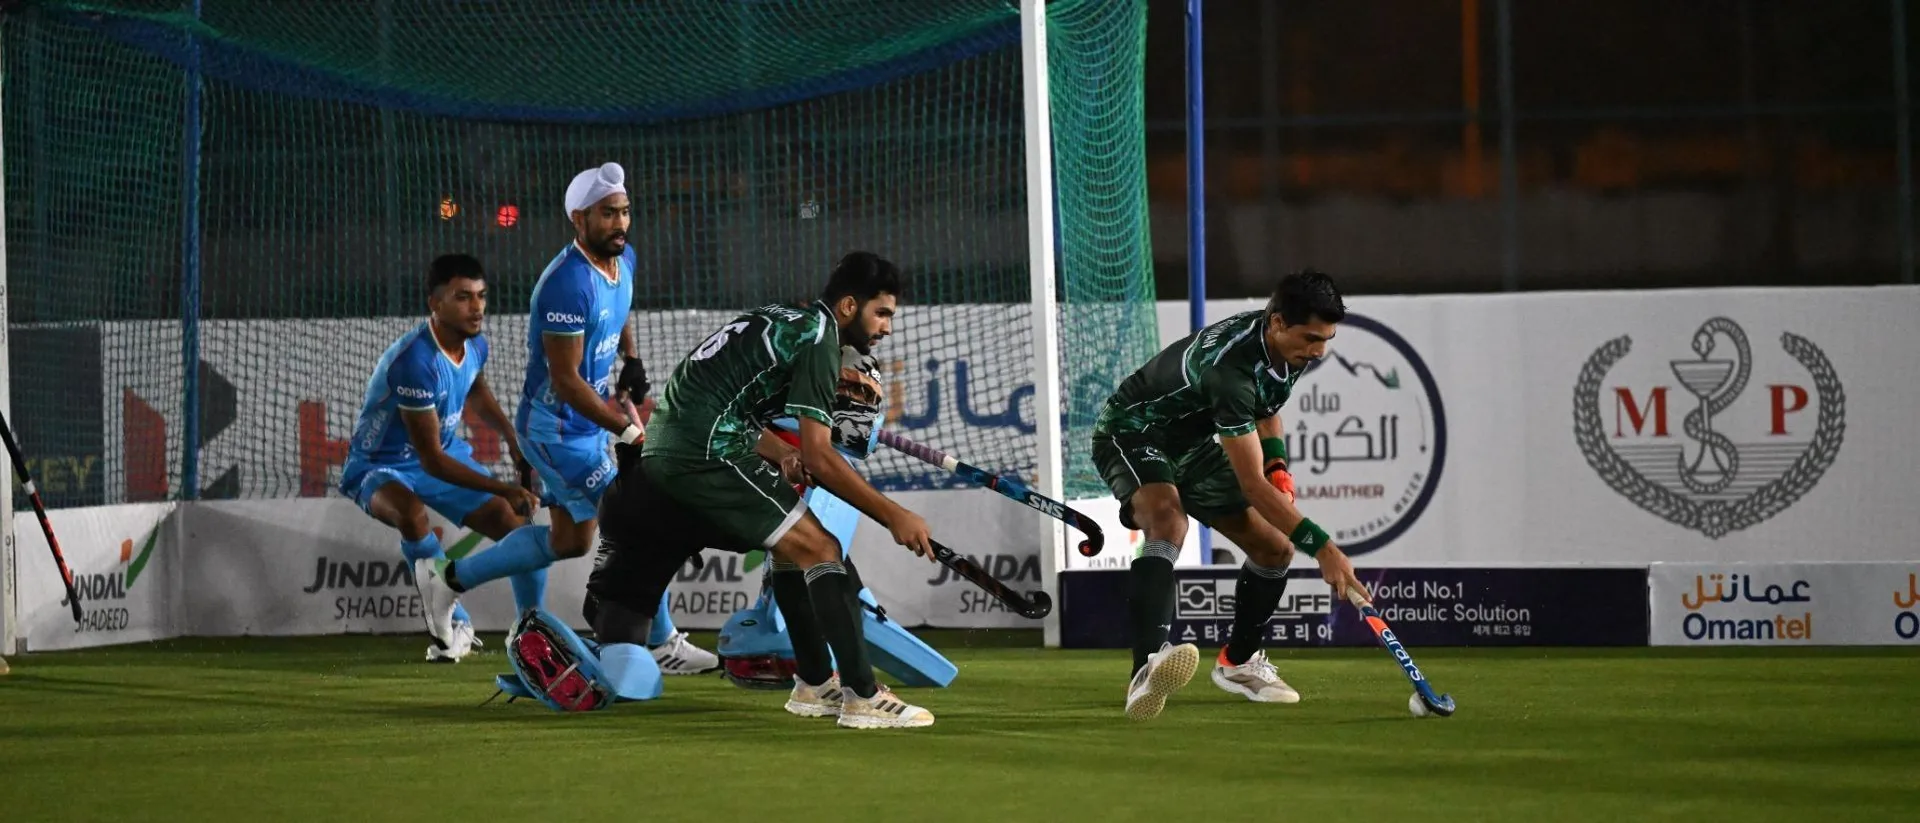 India lose against Pakistan 4-5 at Men's Asian Hockey 5s World Cup Qualifier